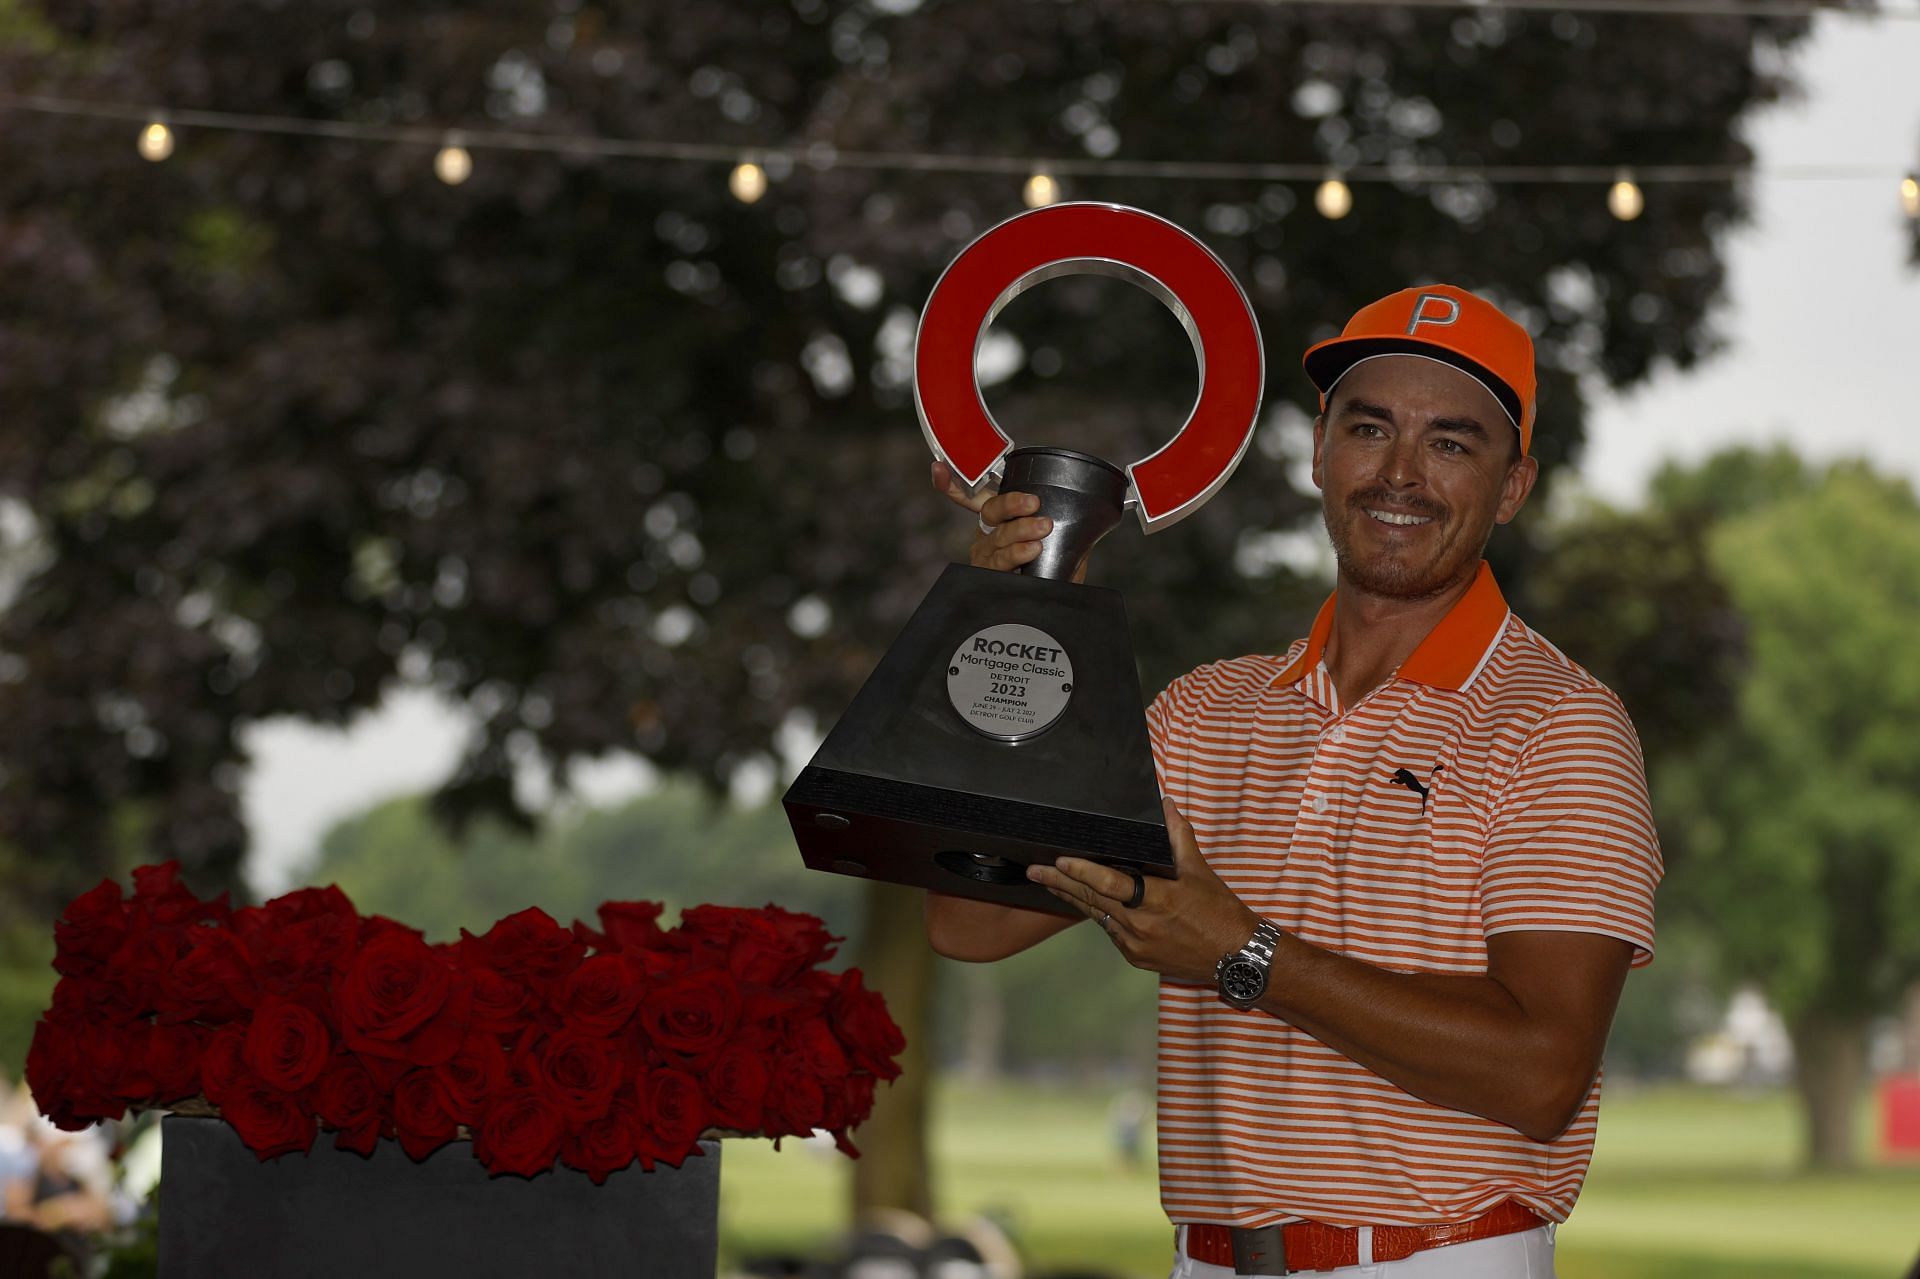 "It's just been a long road” Rickie Fowler gets emotional as he ends 4year winless streak